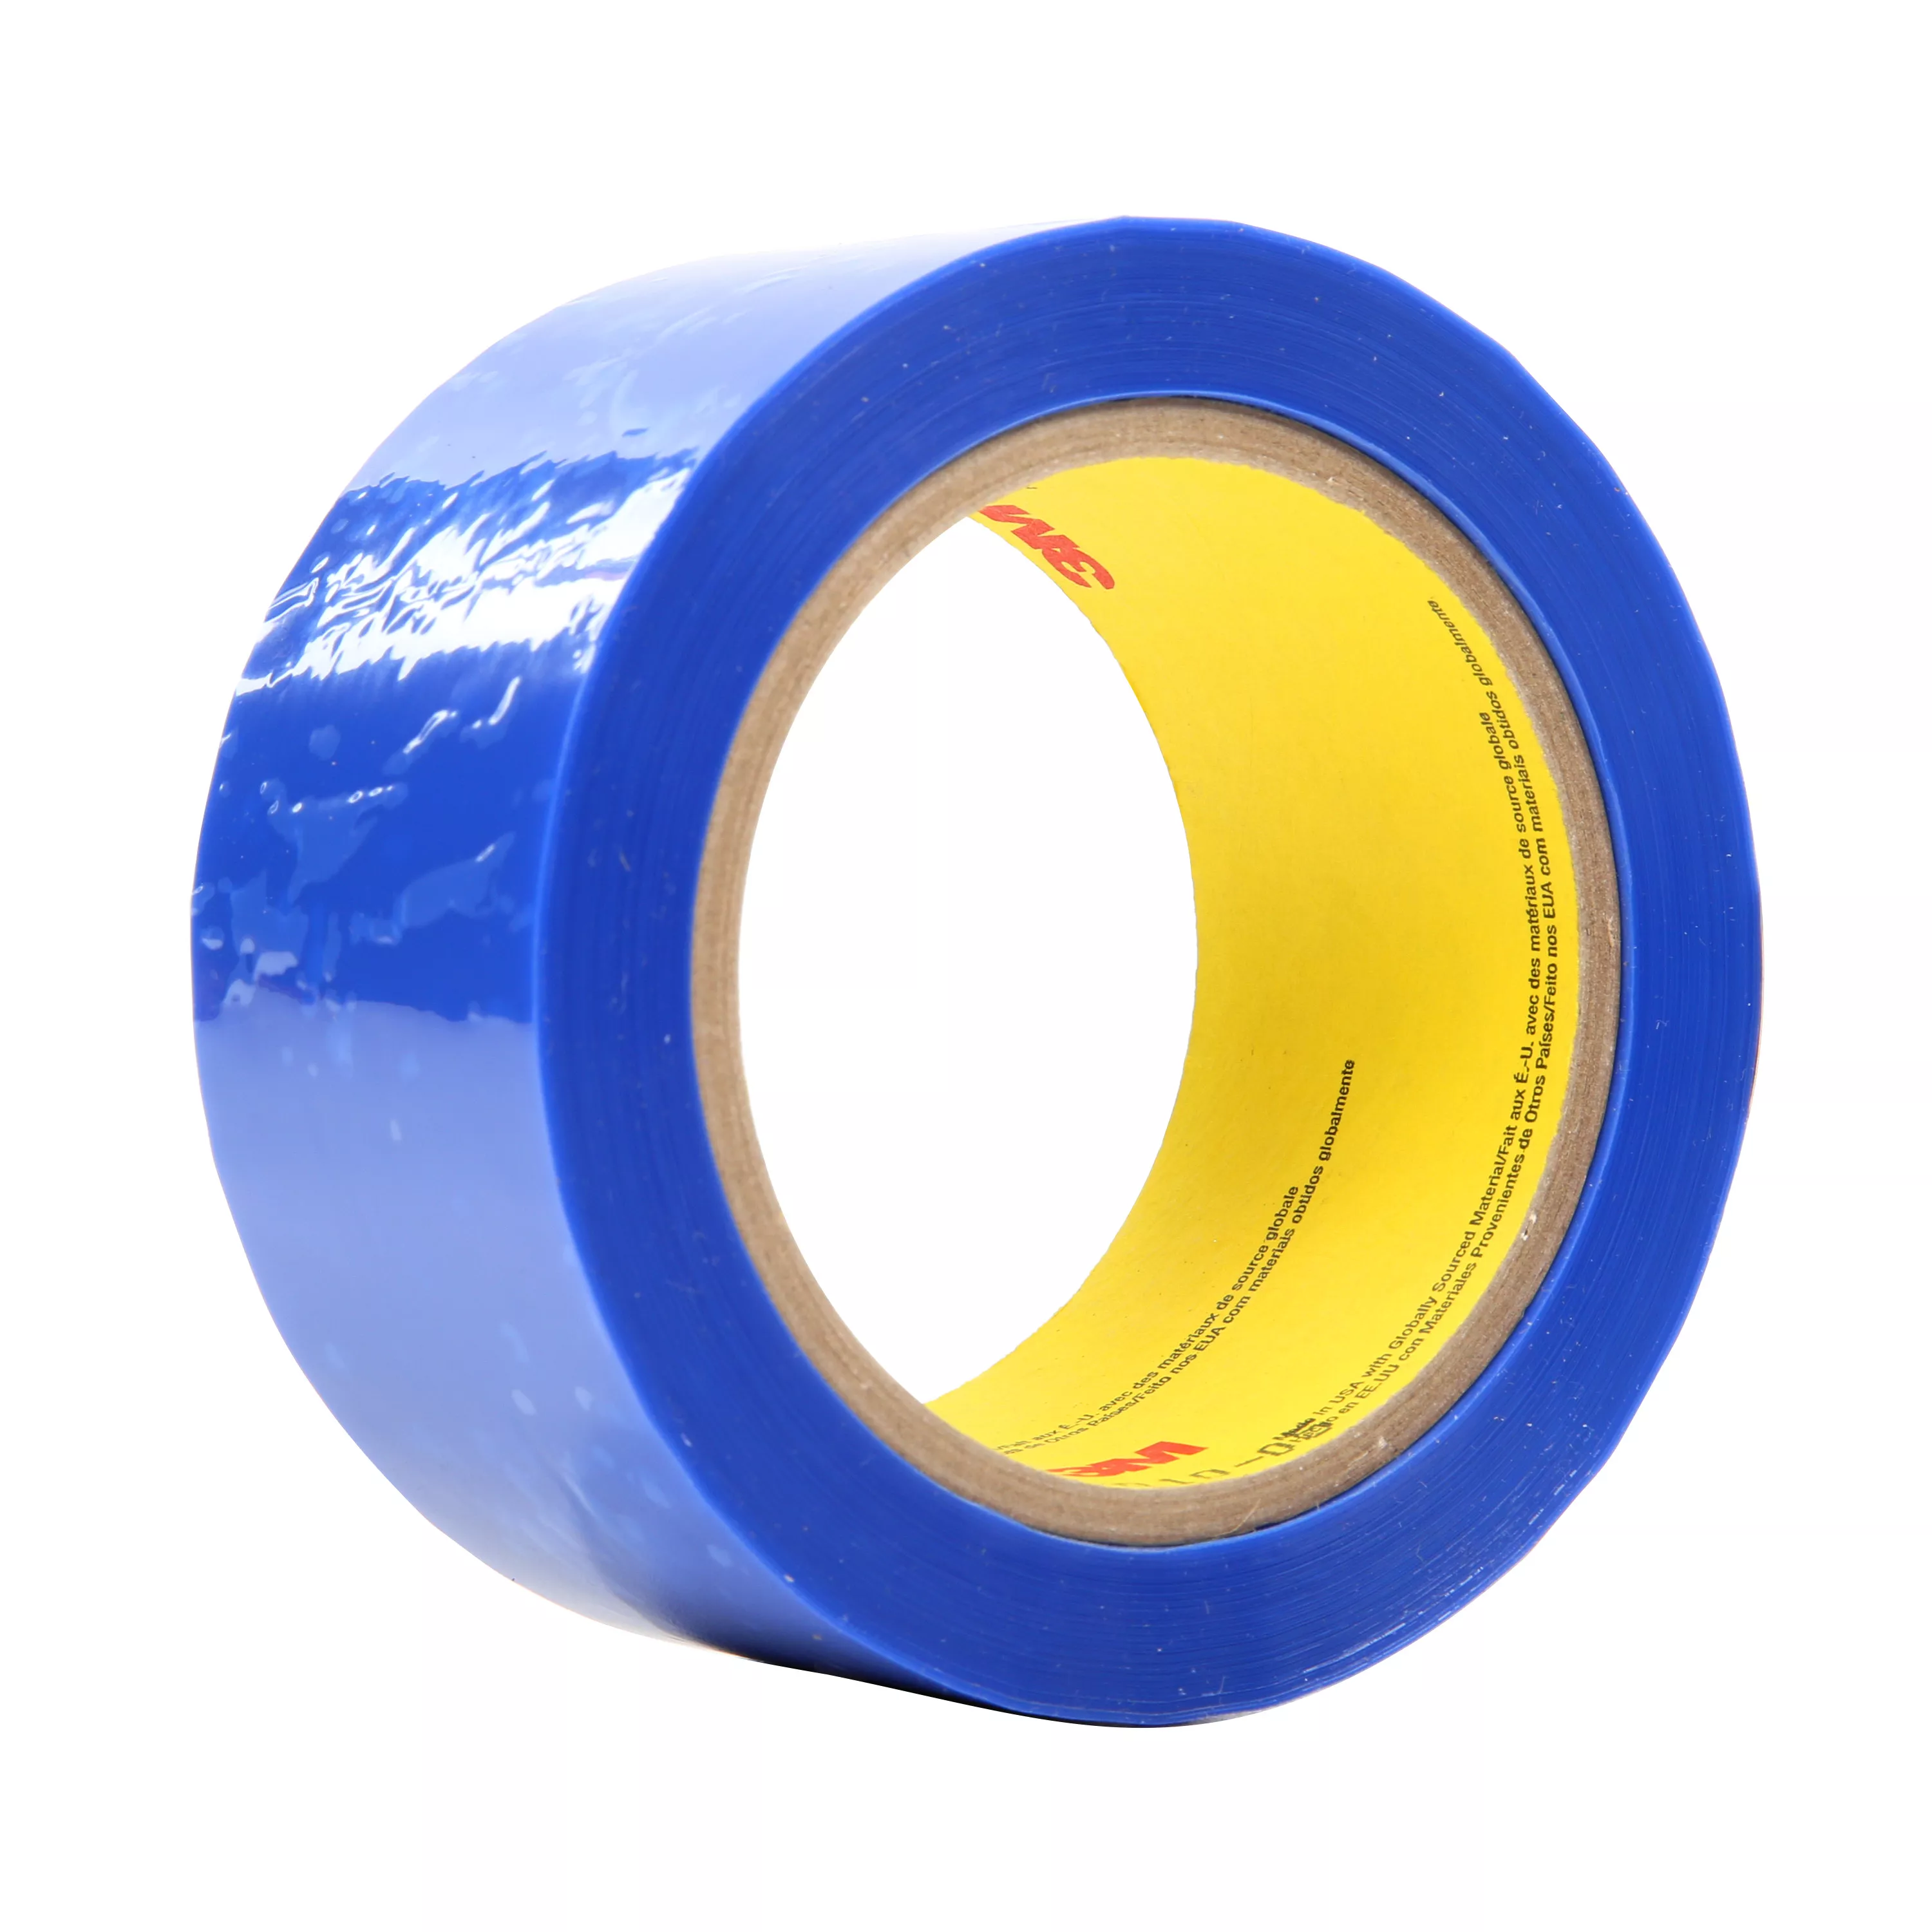 3M™ Polyester Tape 8901, Blue, 2 in x 72 yd, 0.9 mil, 24 Roll/Case